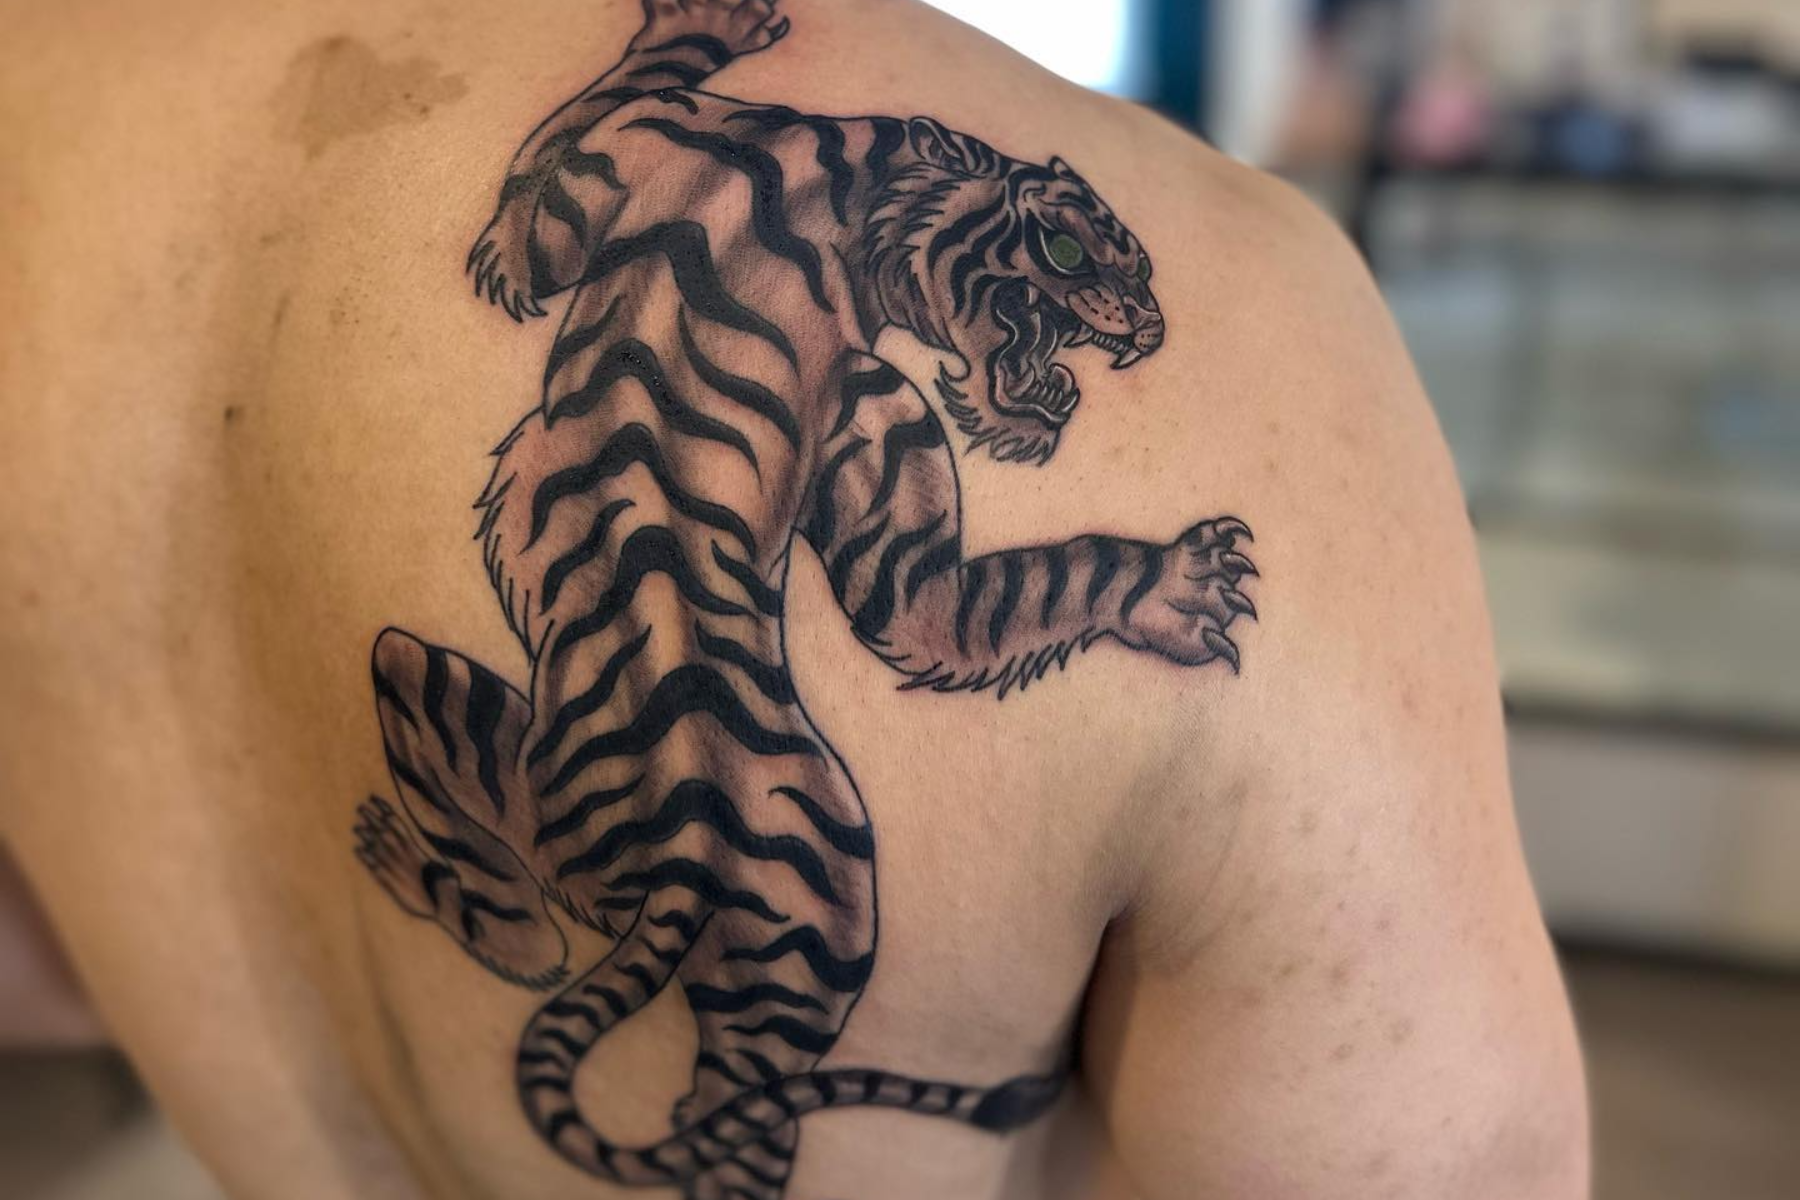 A man has a tiger tattoo on his right shoulder